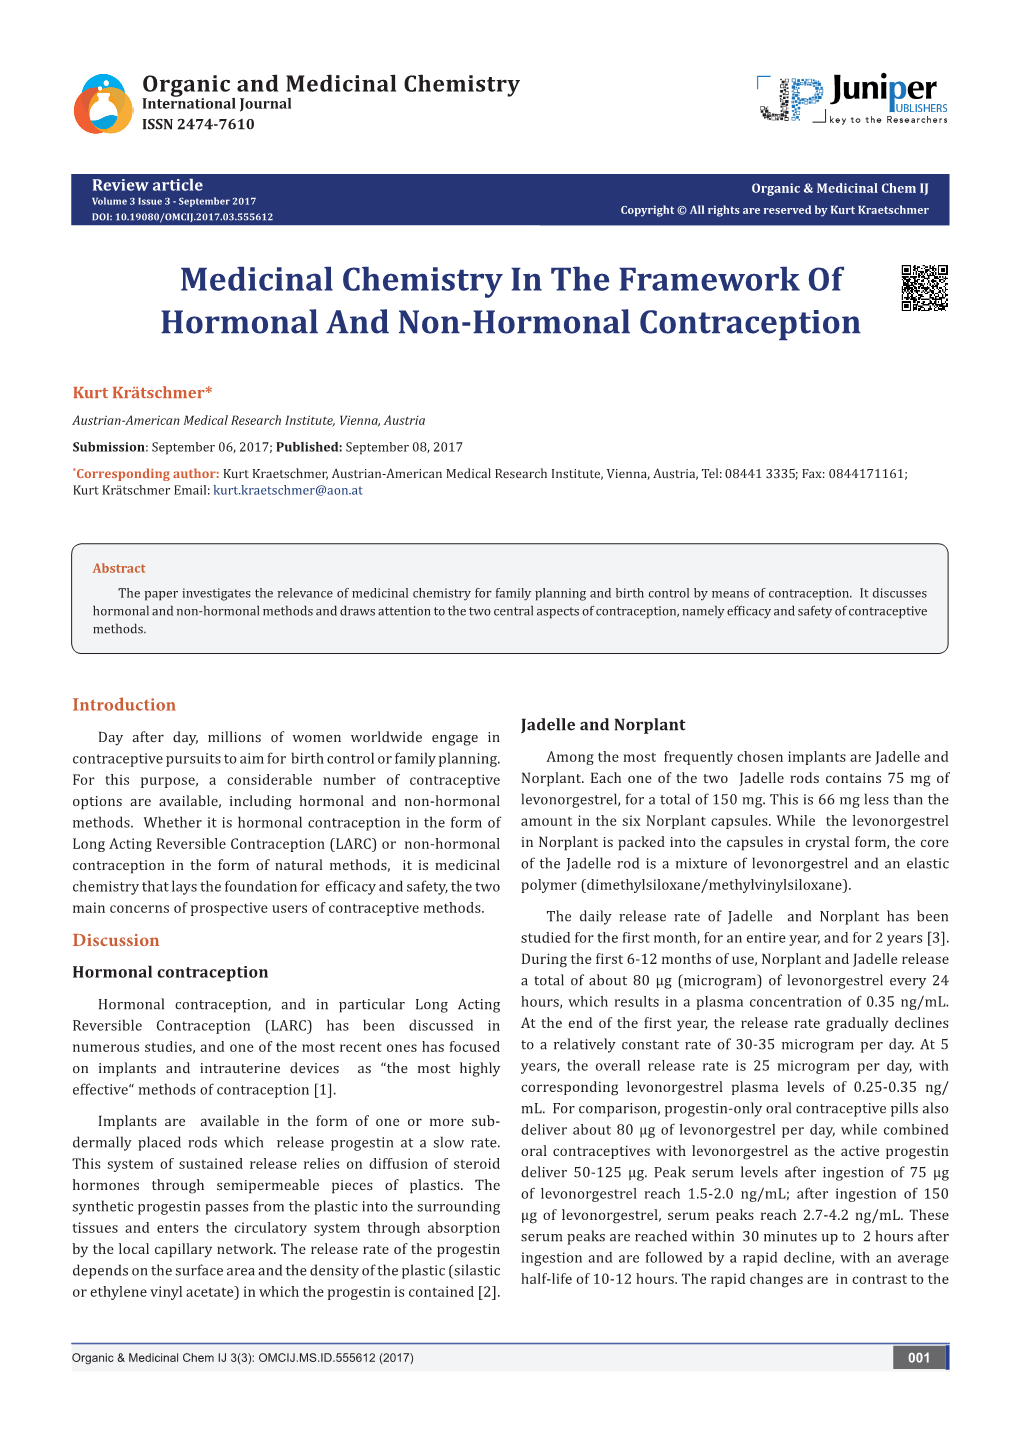 Medicinal Chemistry in the Framework of Hormonal and Non-Hormonal Contraception